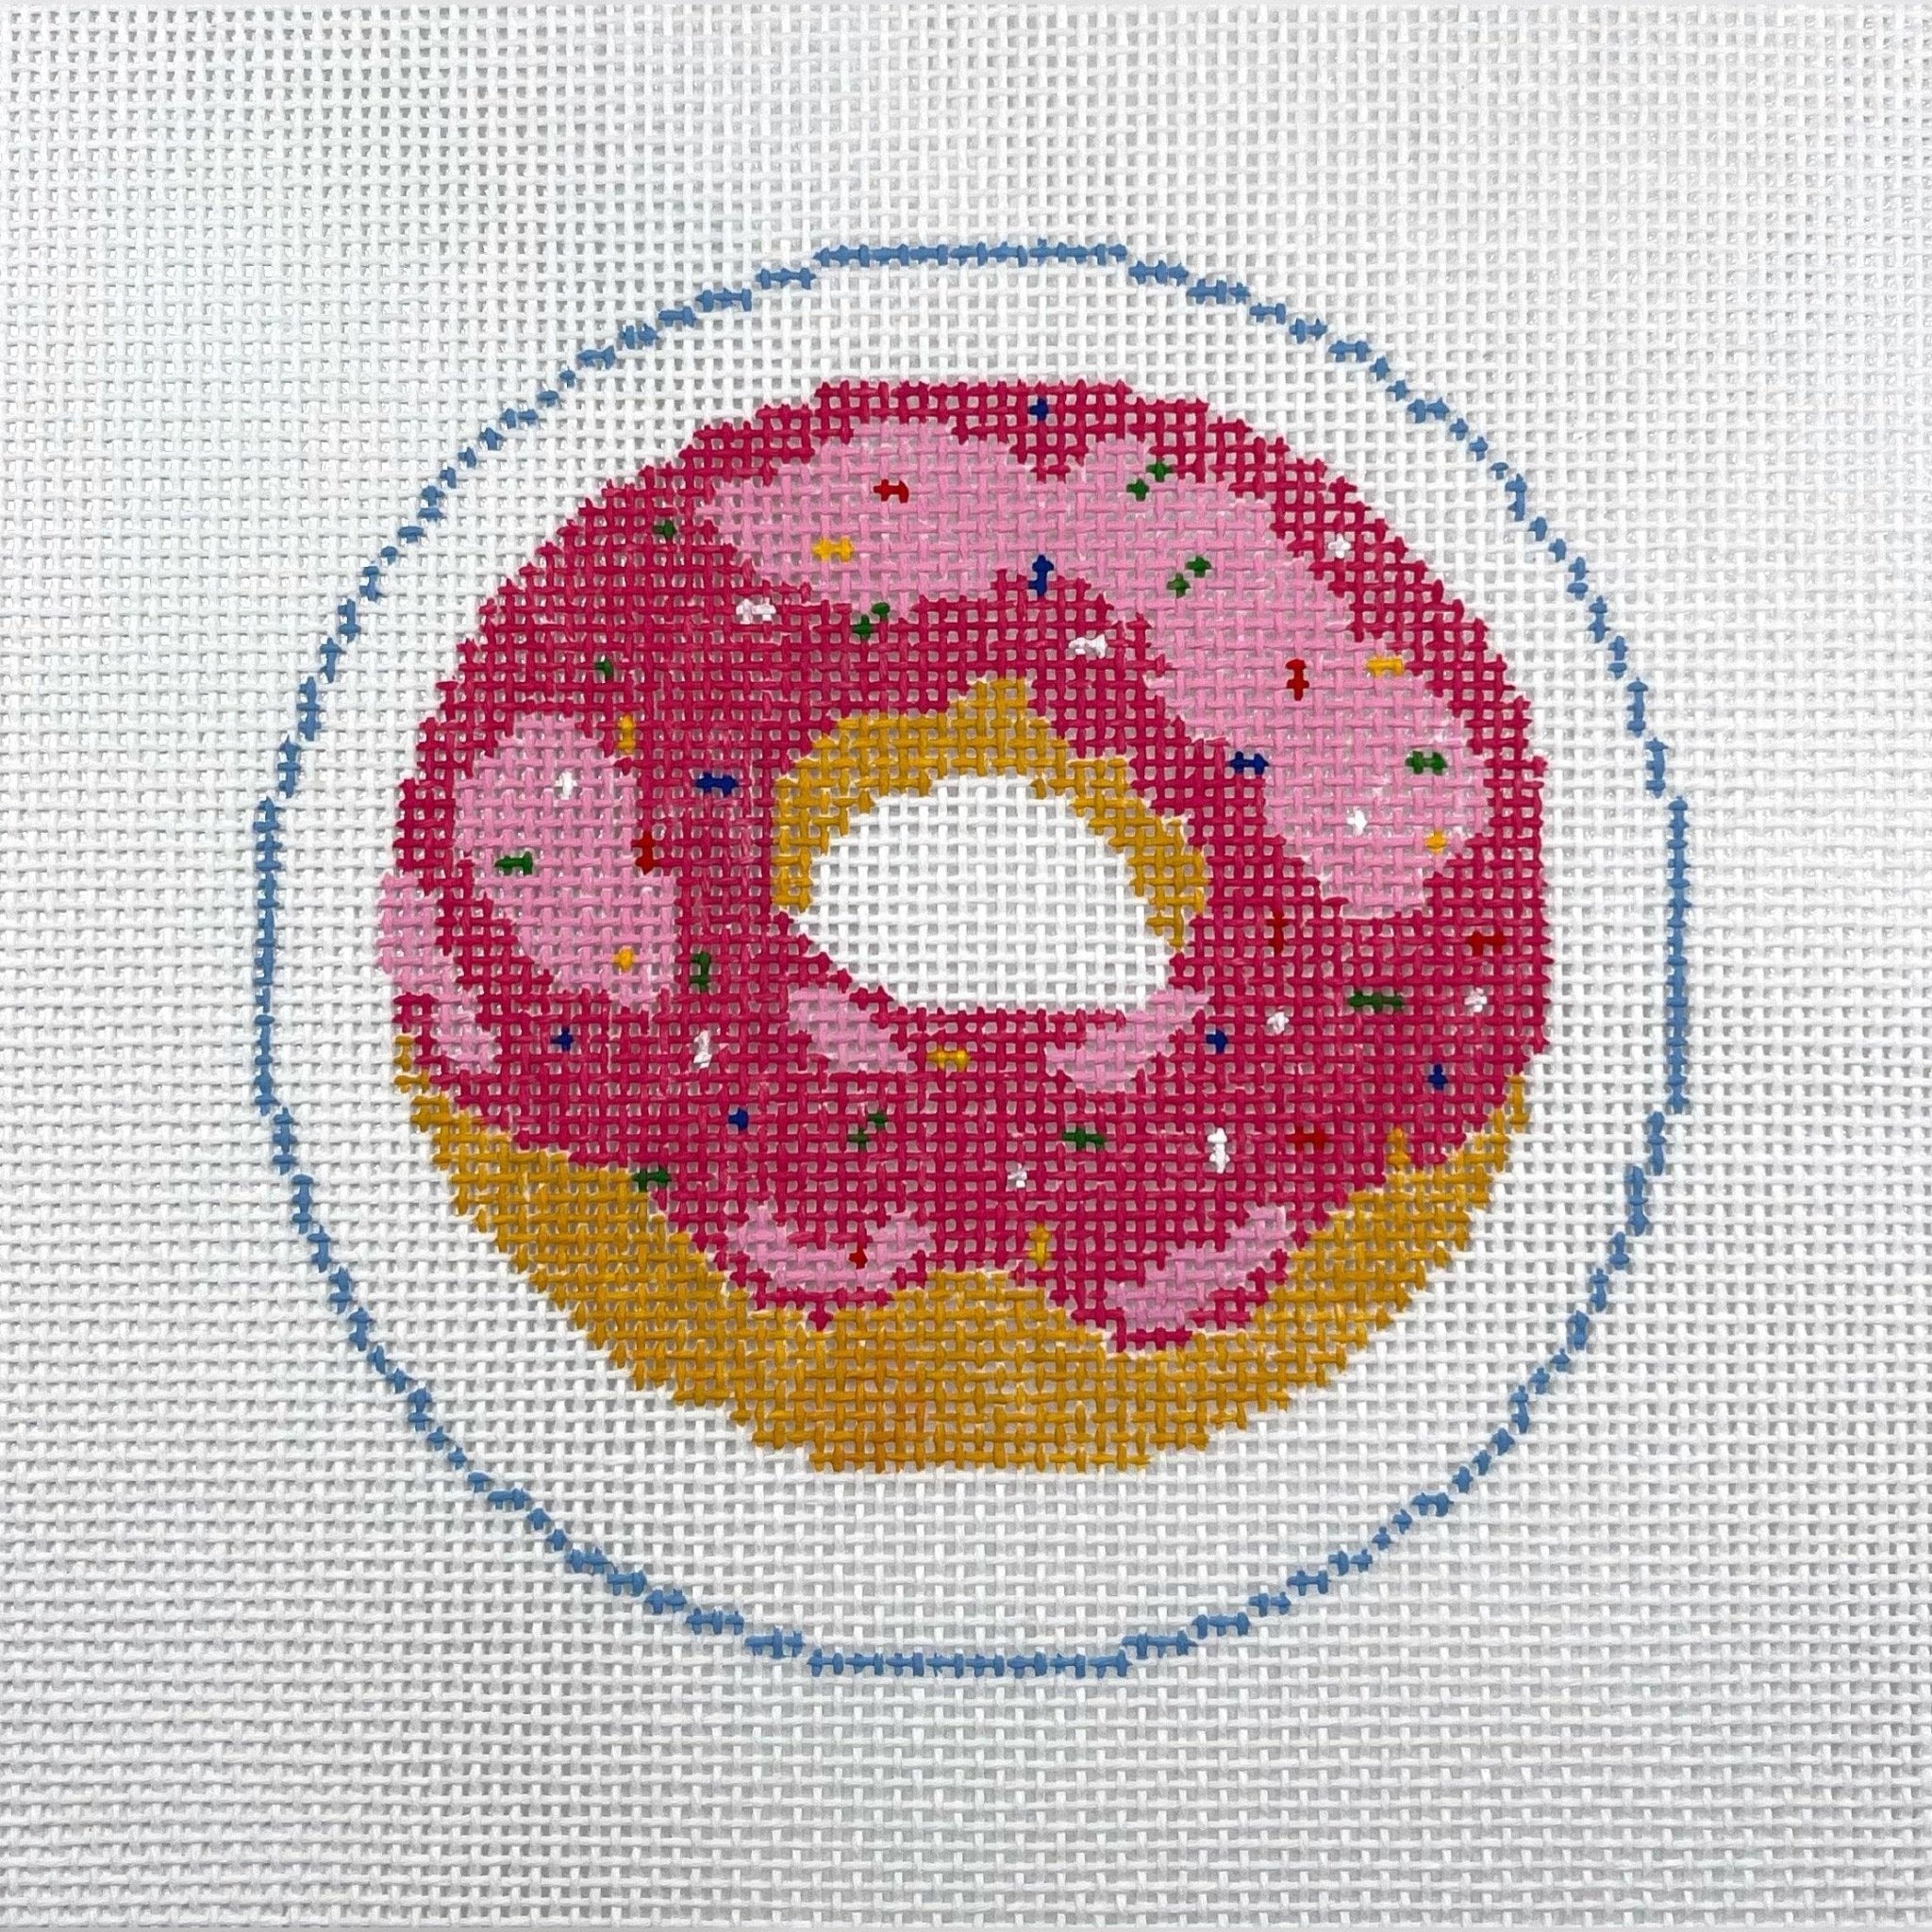 Donut ornament canvas - Needlepoint by Laura